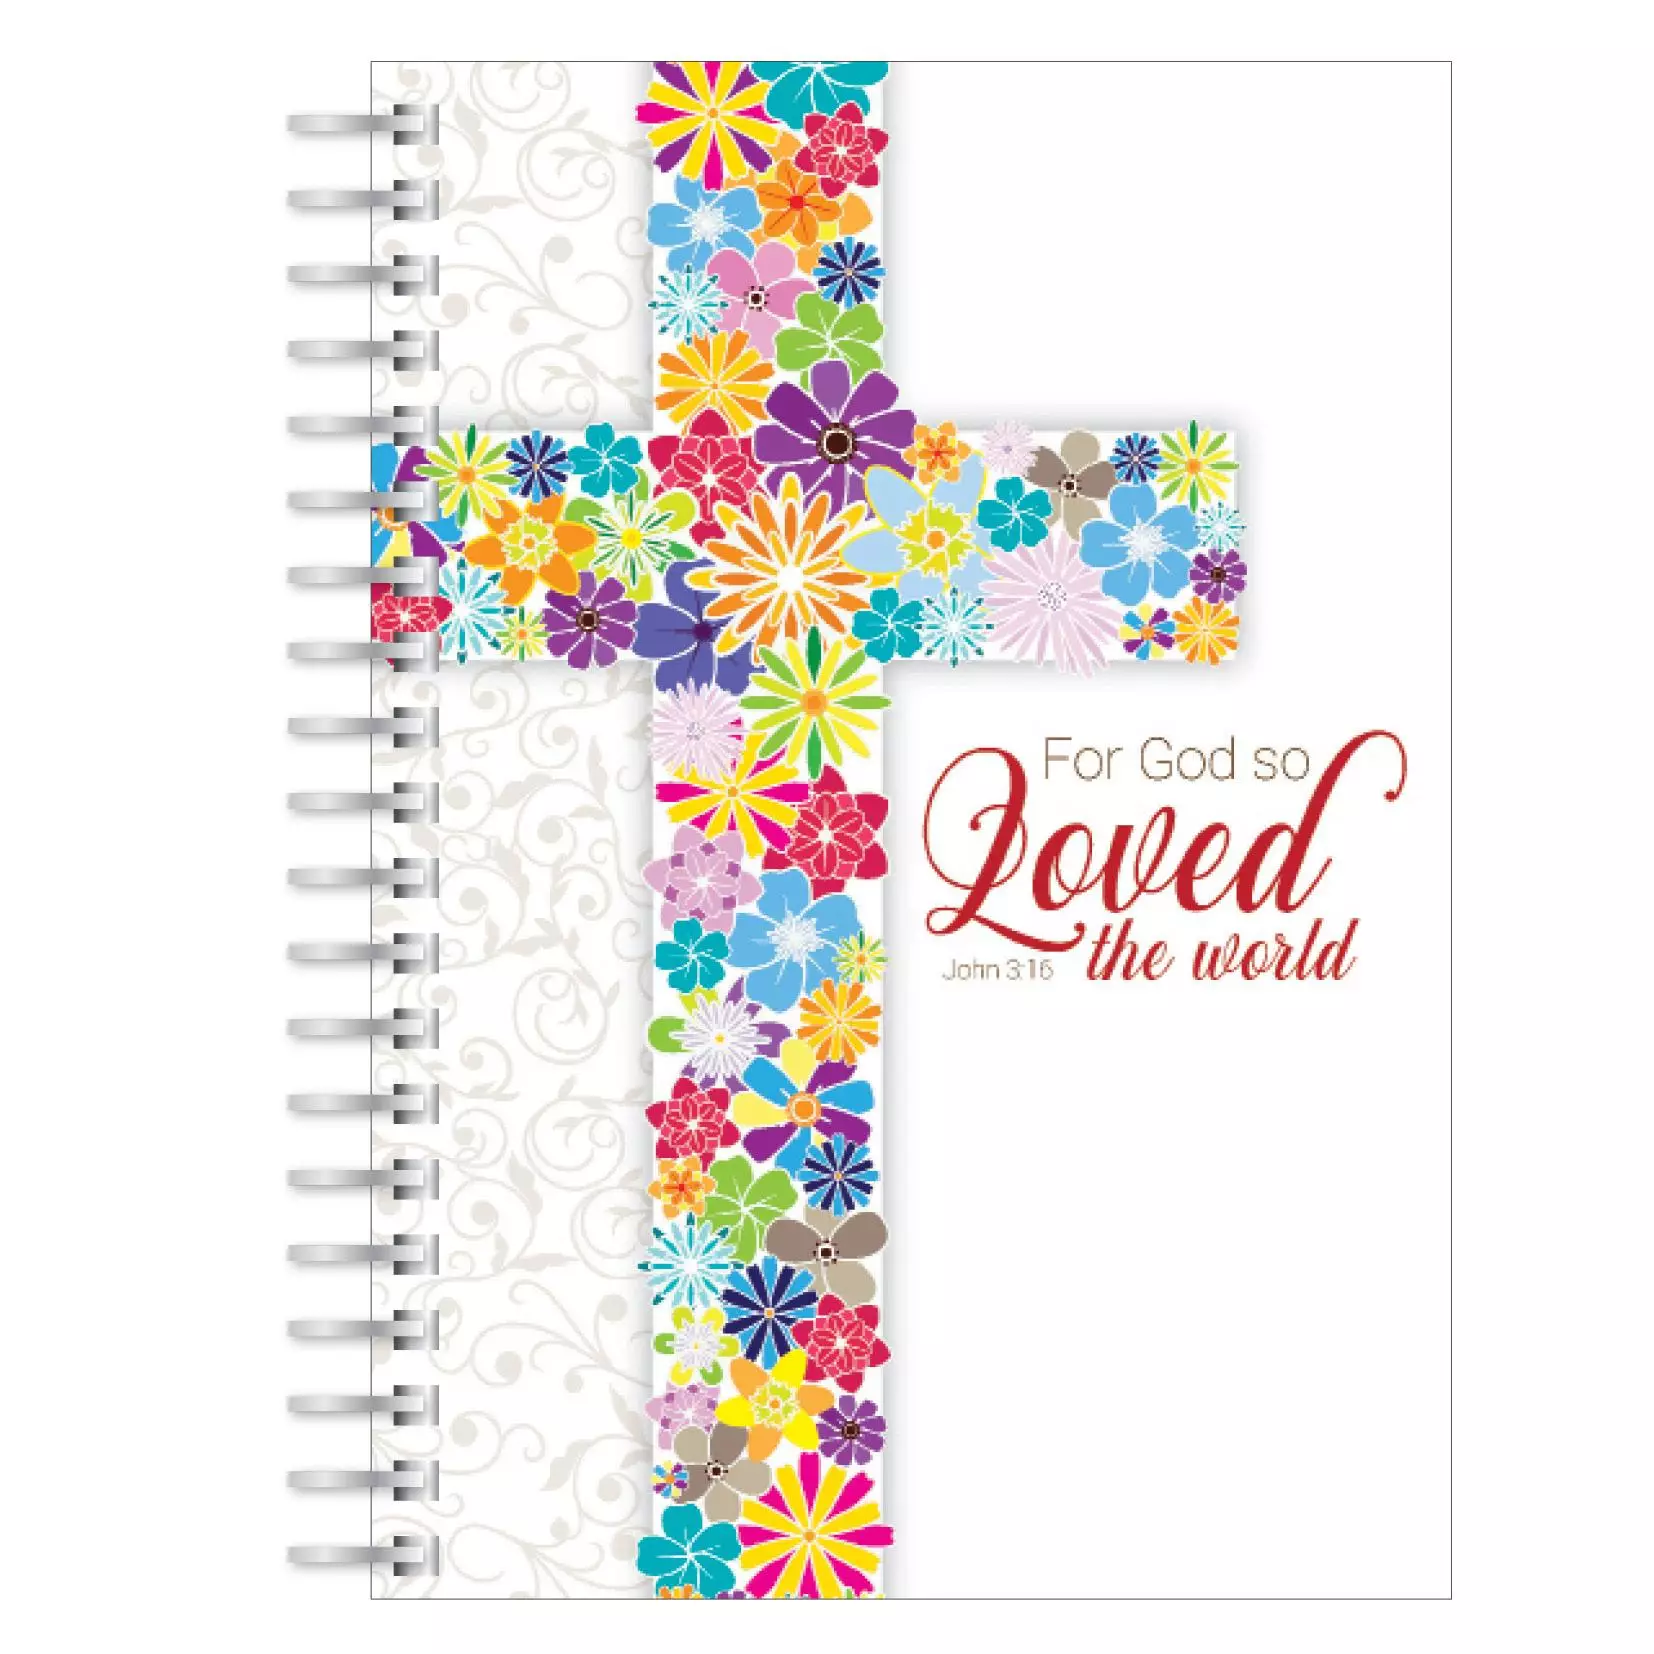 God so loved the world A5 notebook